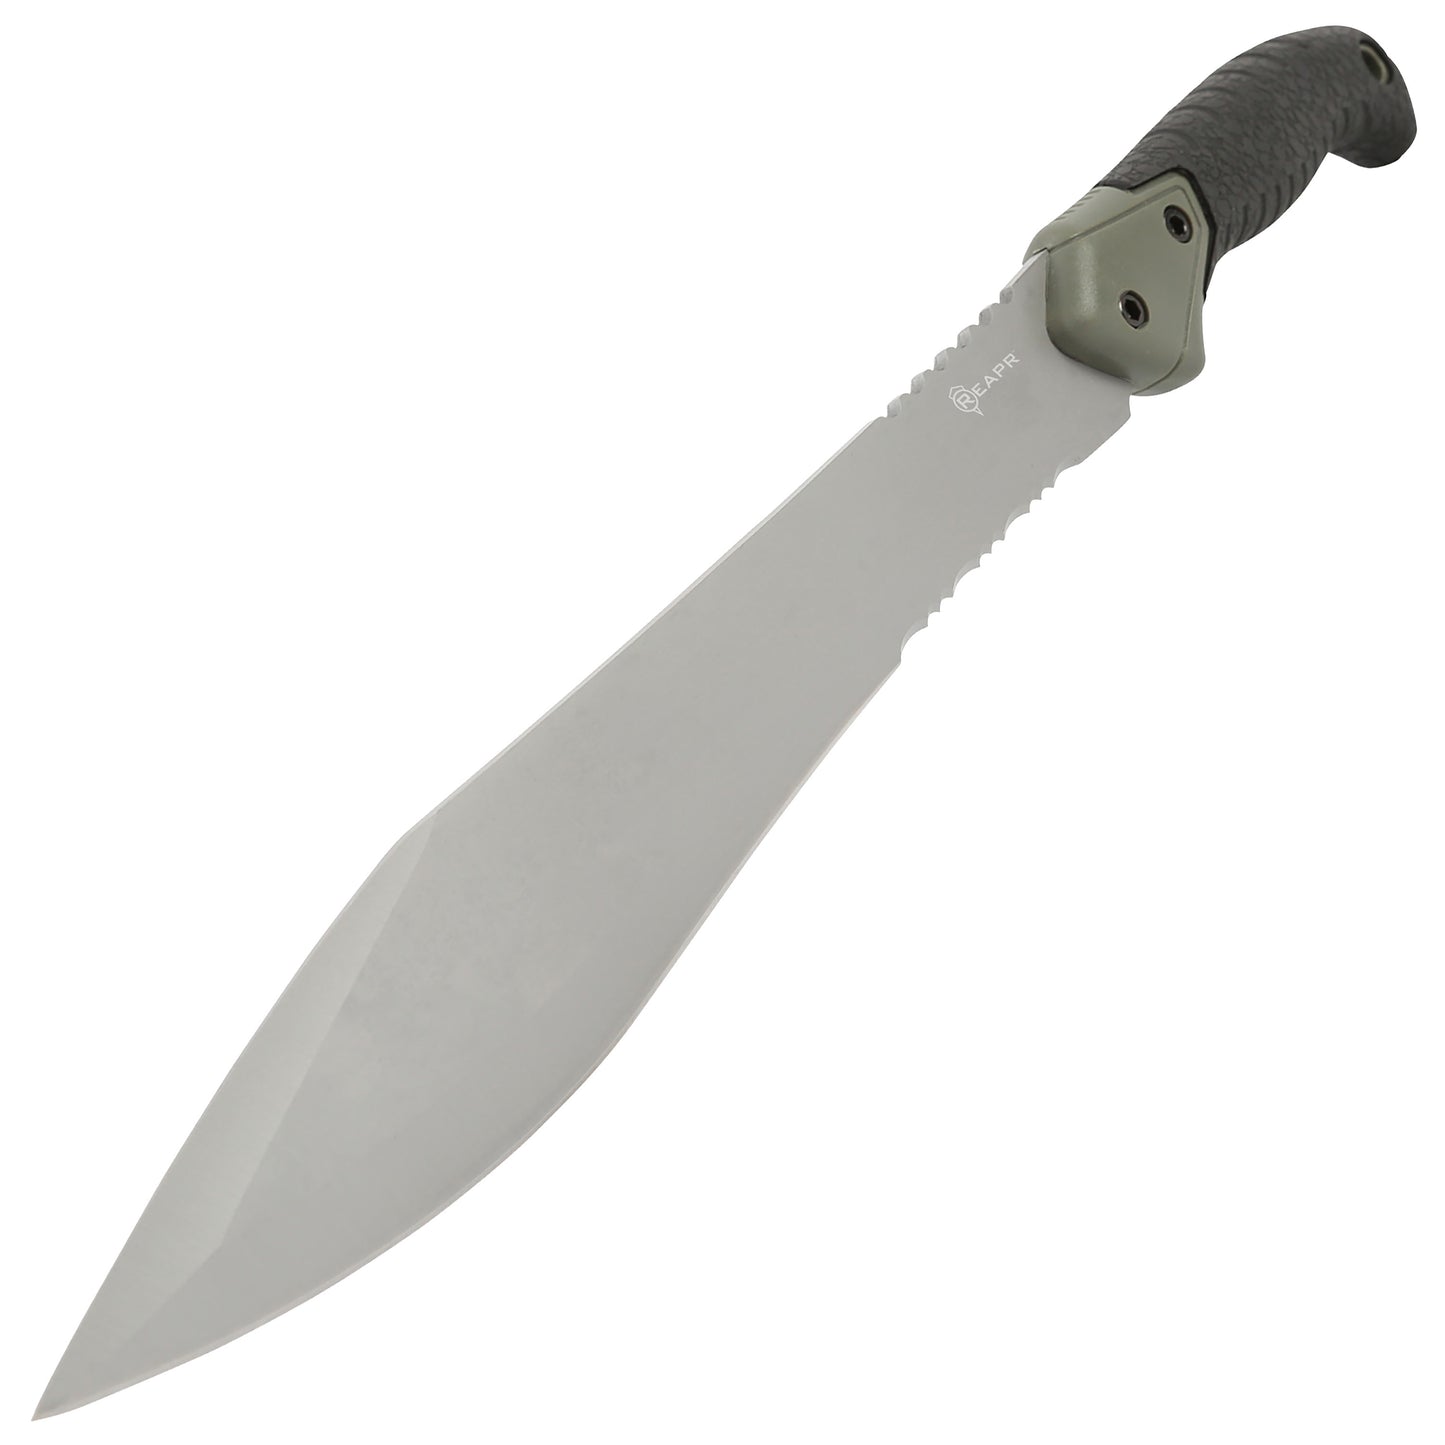 REAPR 11006 Reapr TAC Jungle Knife all-round camping machete and survival knife.